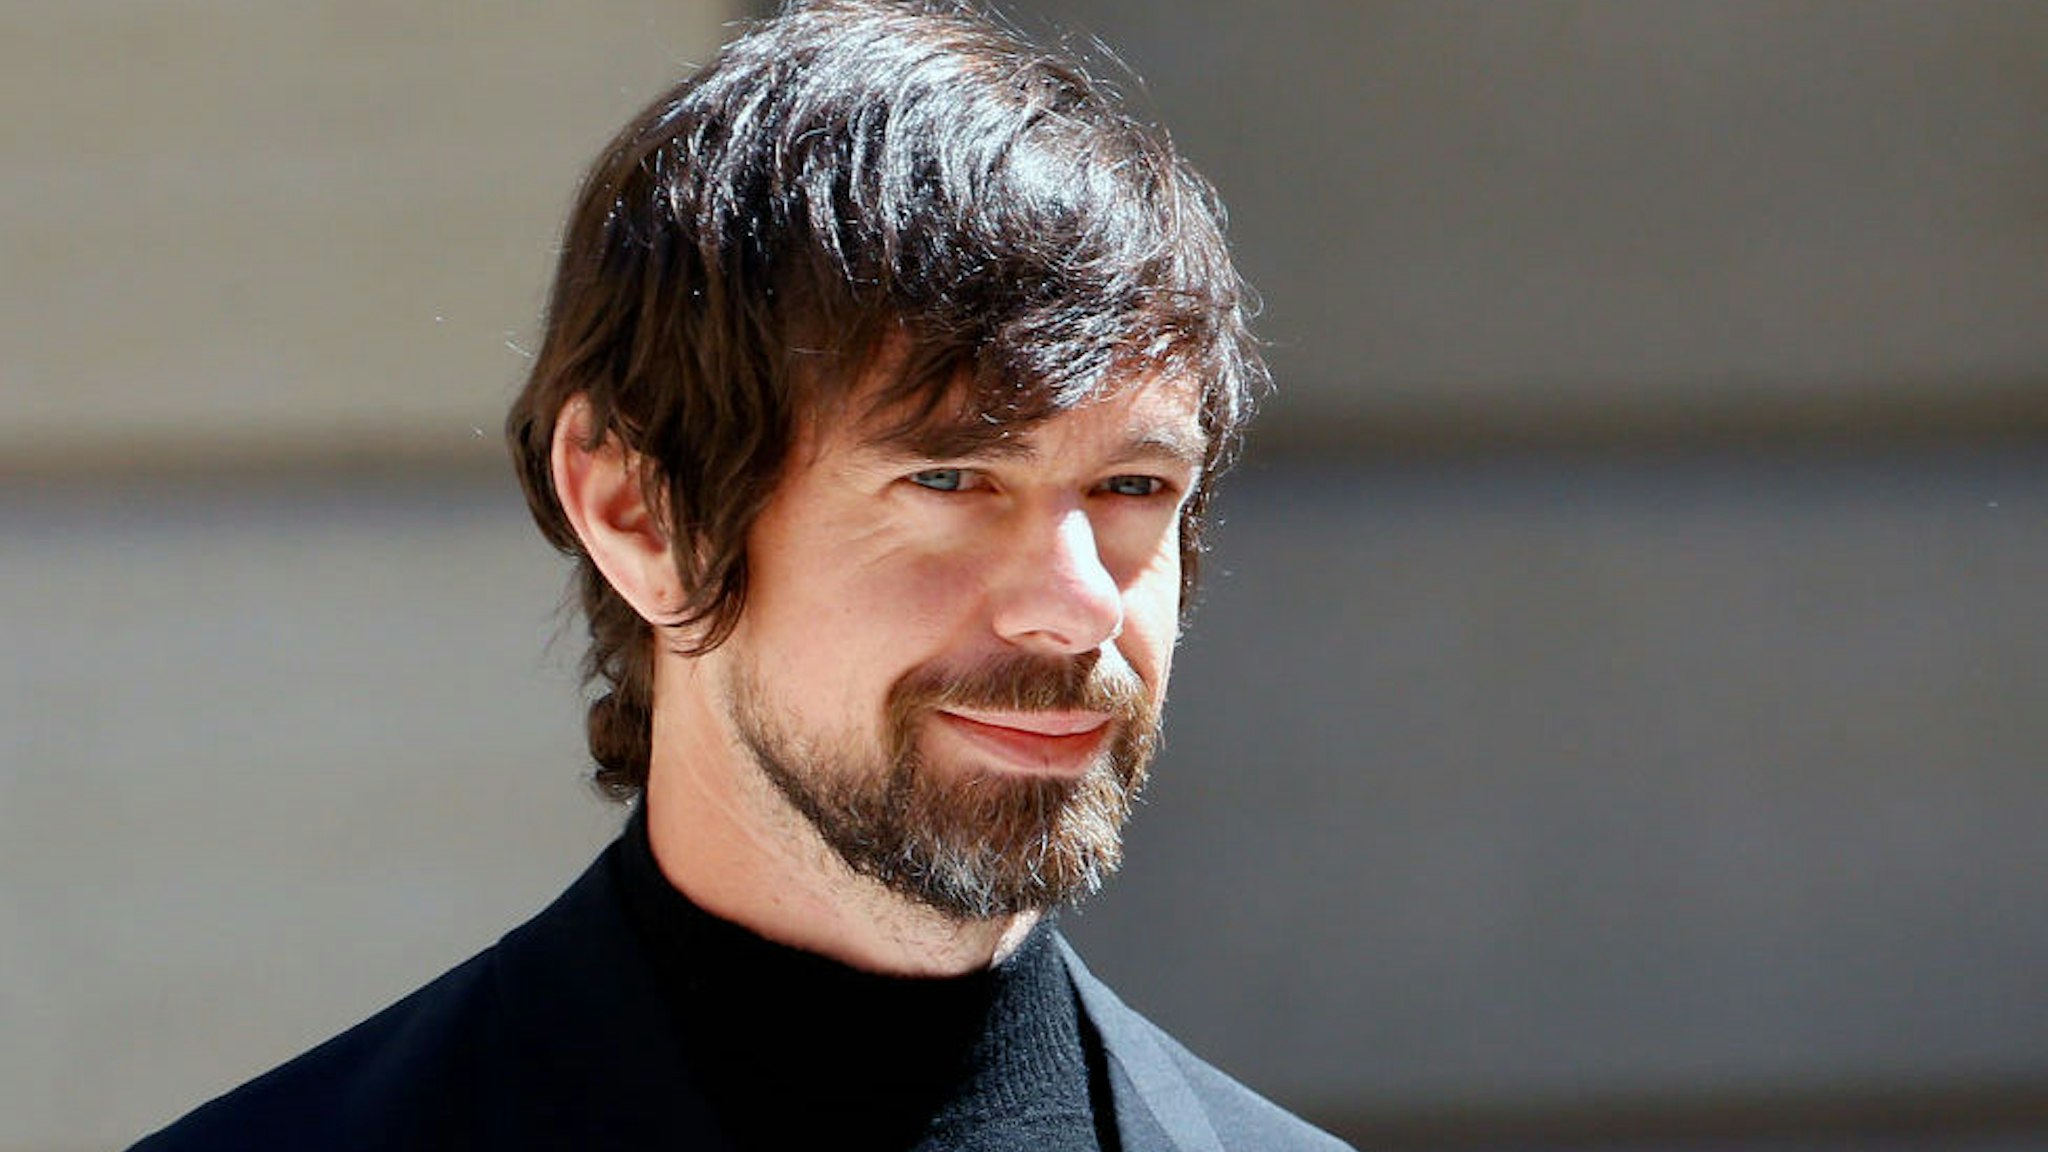 Chief executive officer of Twitter Inc. and Square Inc. Jack Dorsey arrives to attend the "Tech for Good" Summit at Hotel de Marigny on May 15, 2019 in Paris, France.